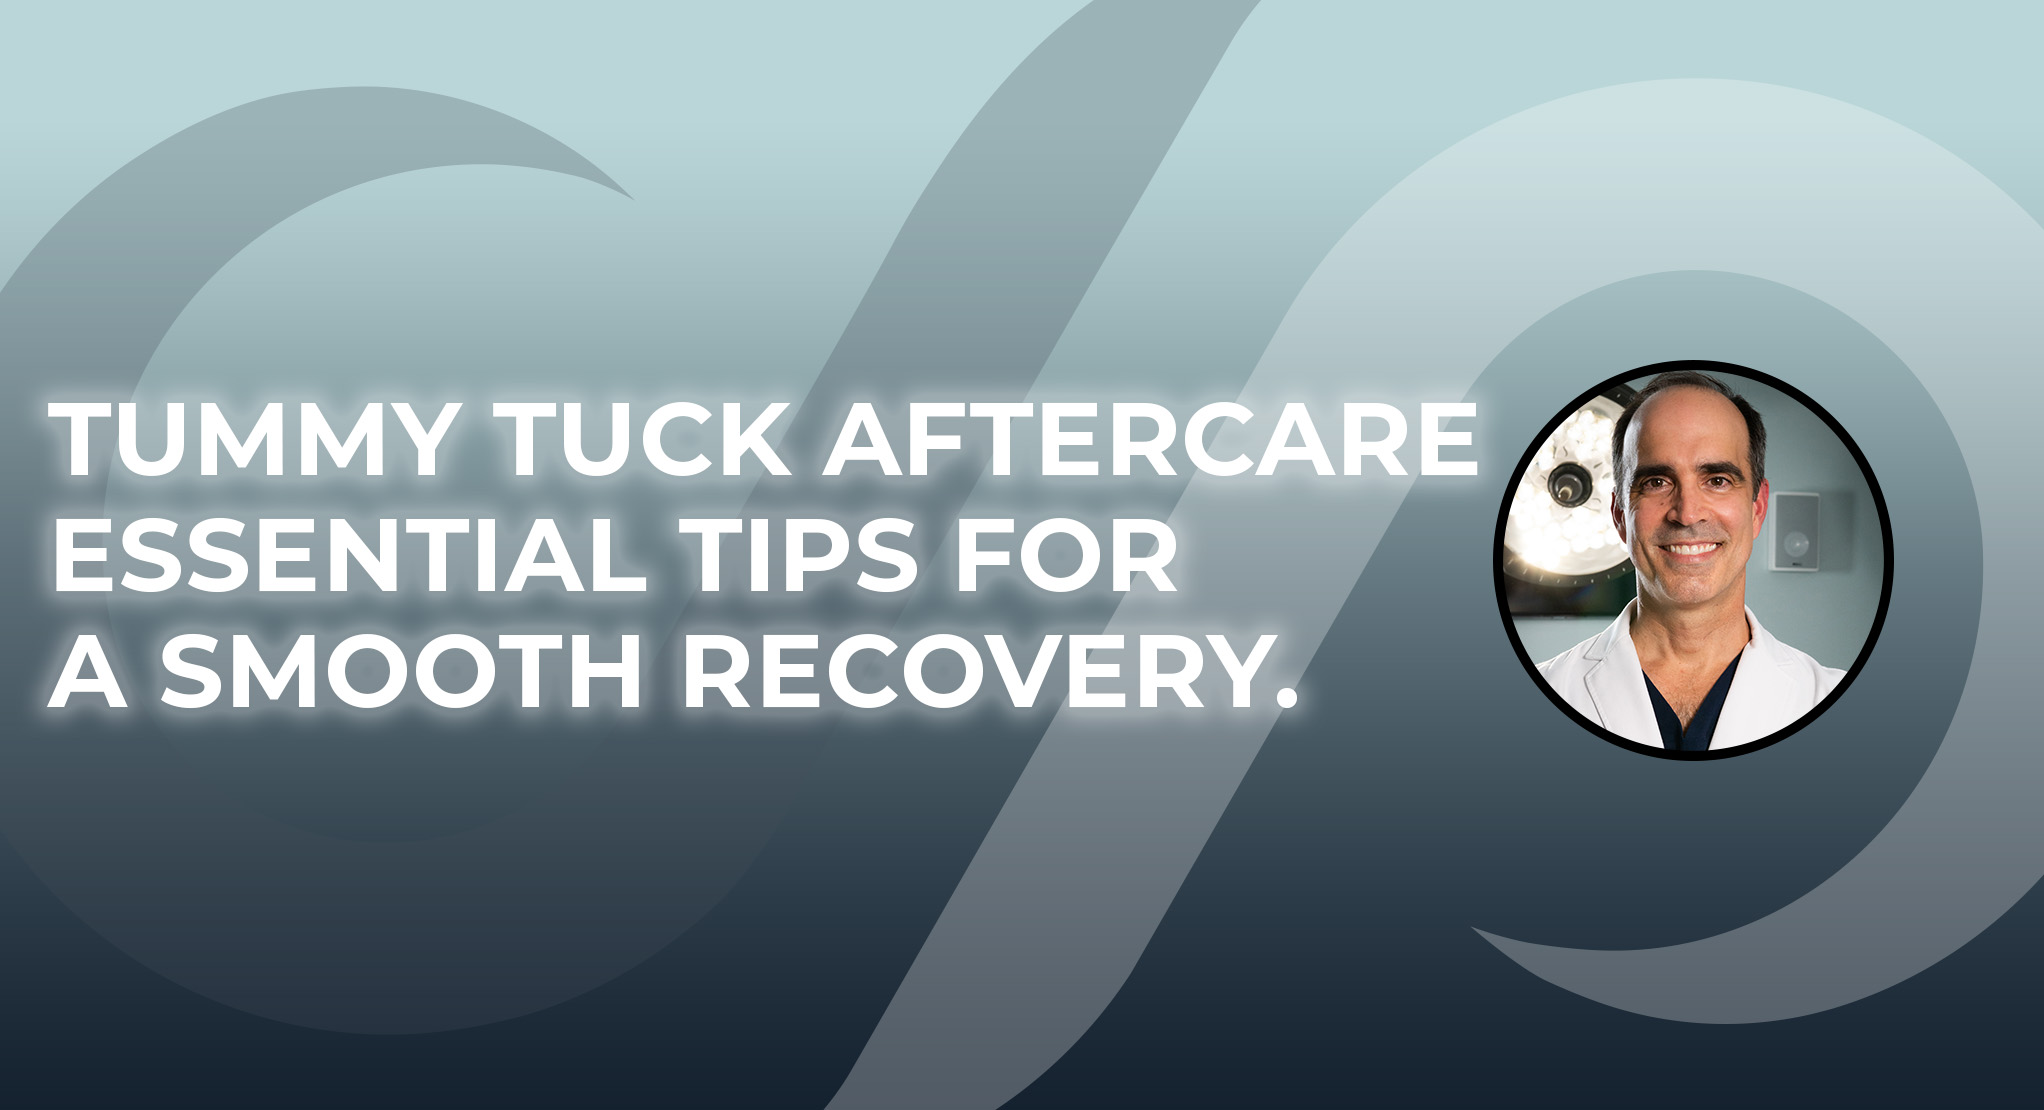 How Long Is Tummy Tuck Recovery? An Expert Shares Tips for How To Heal  Optimally. – Dr. David Stoker